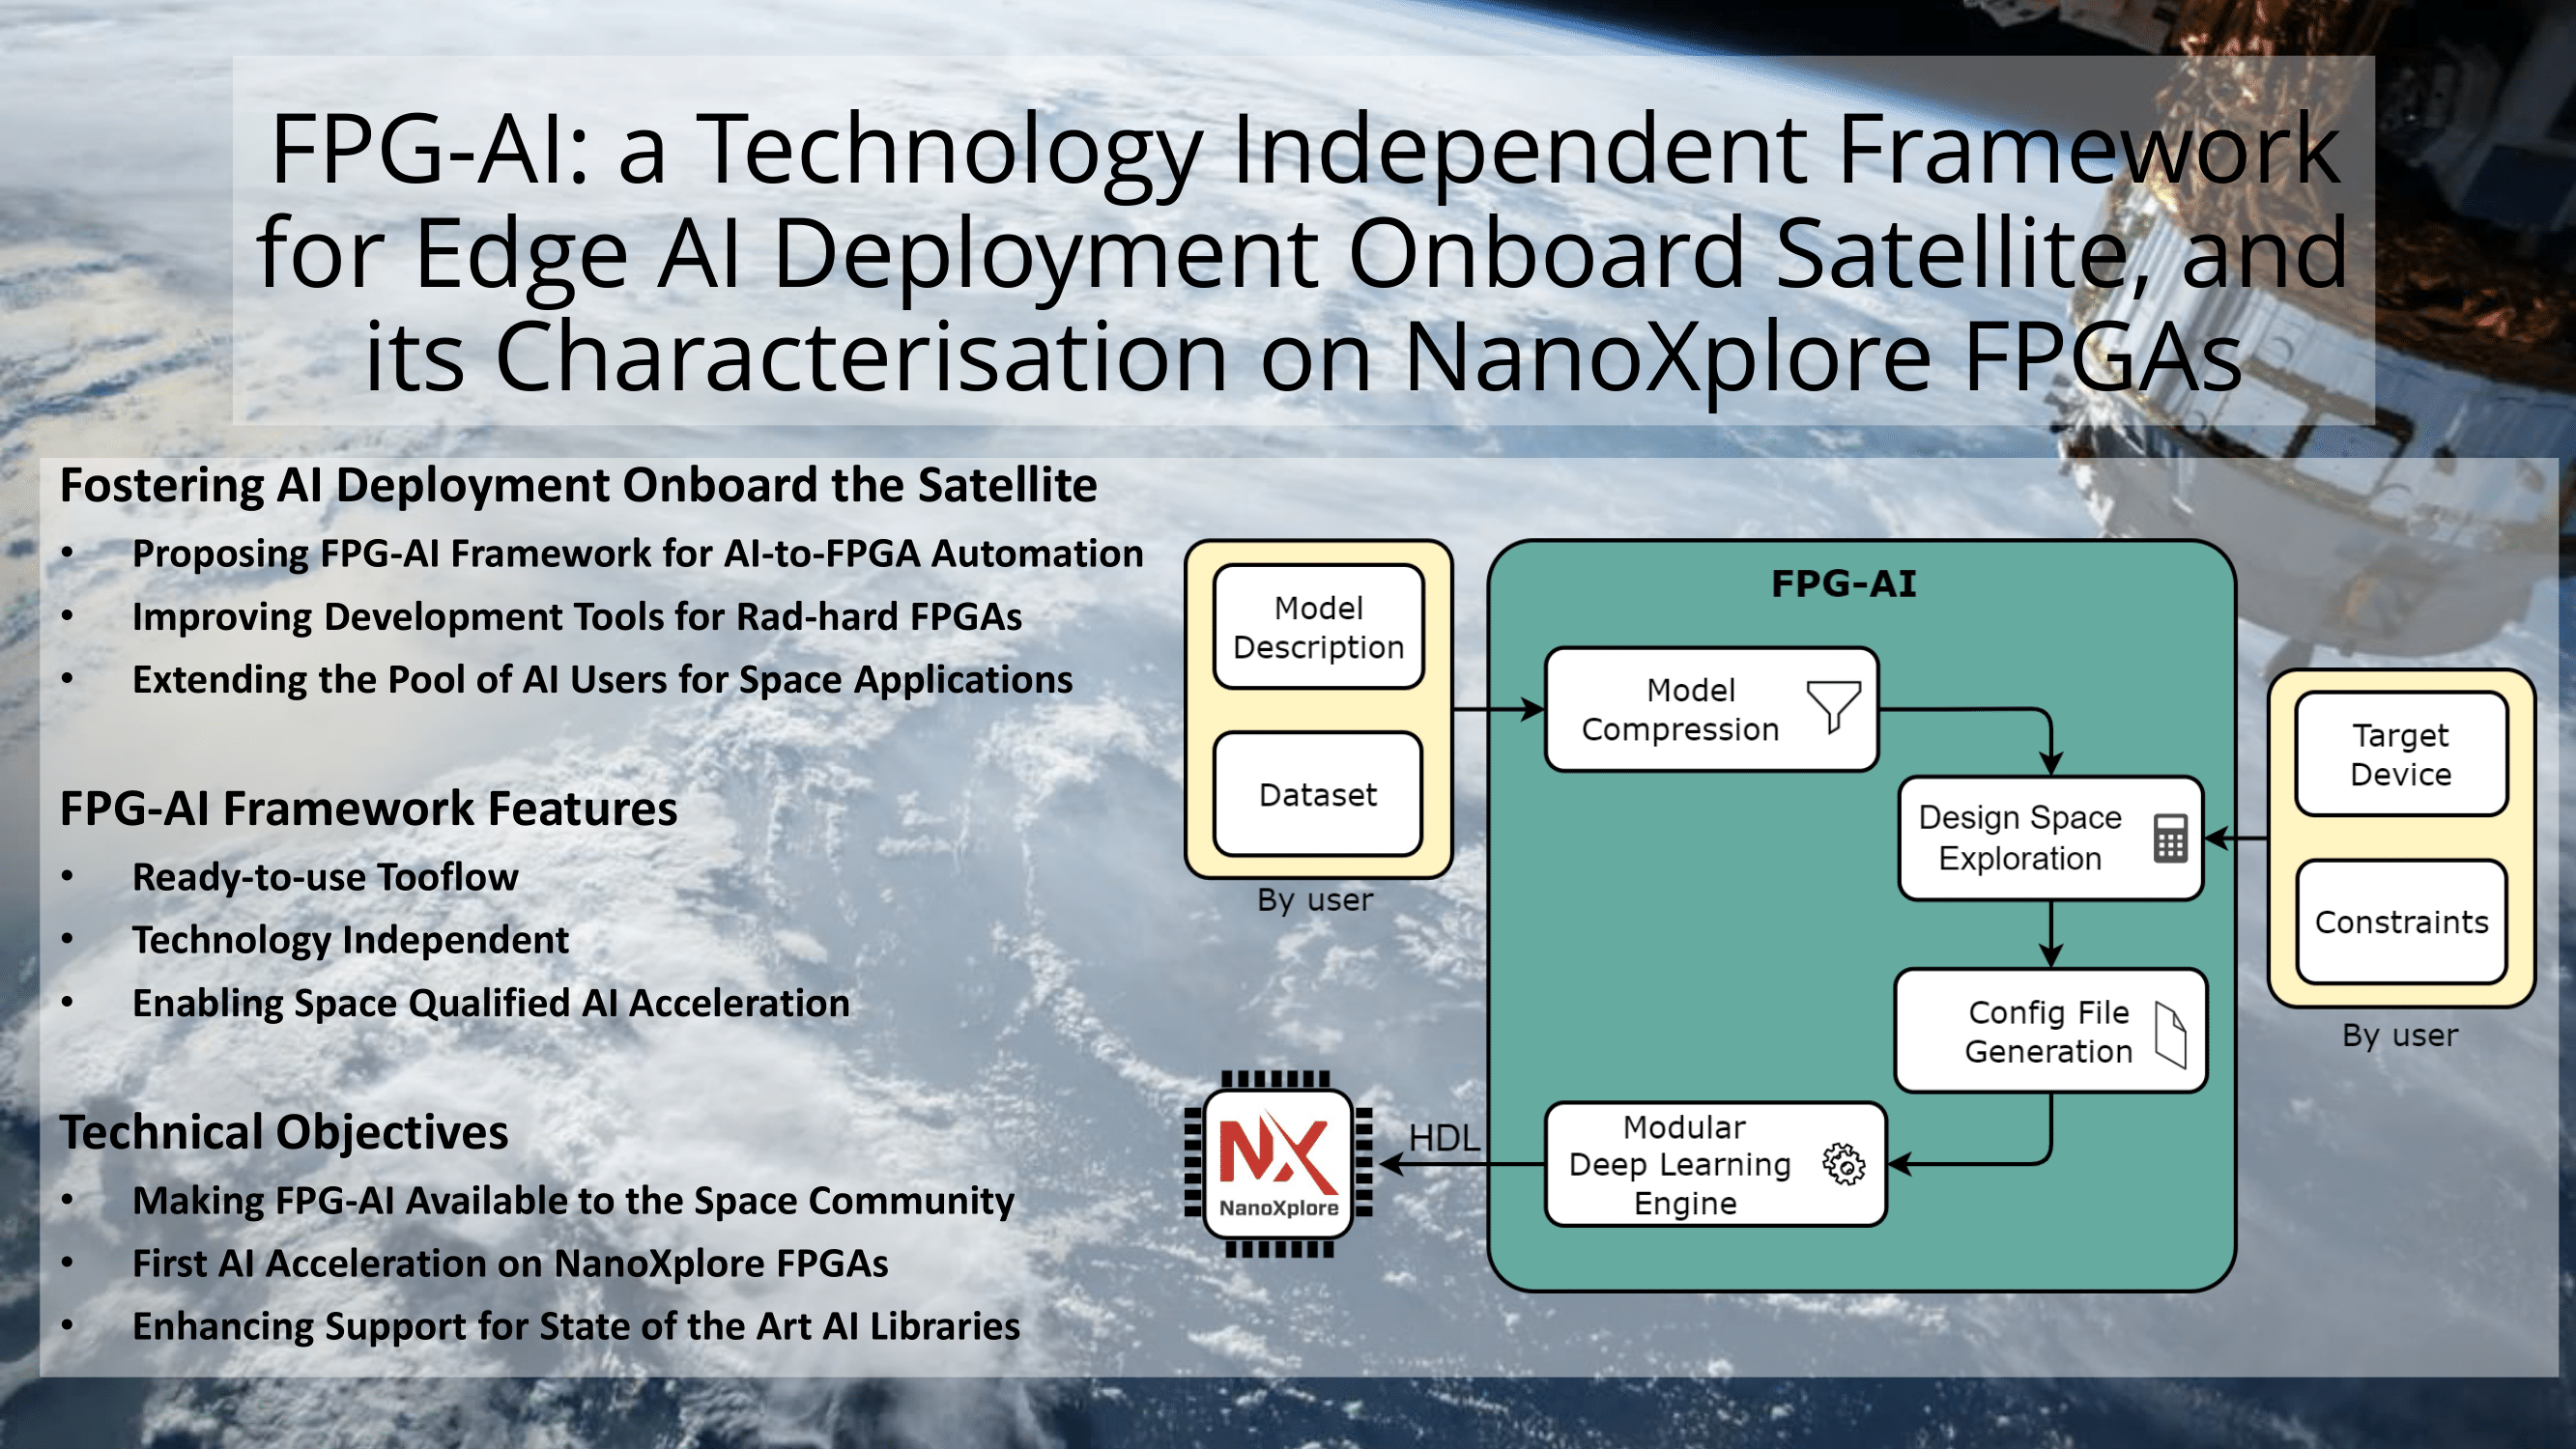 FPG-AI: a Technology Independent Framework for Edge AI Deployment Onboard Satellite, and its Characterisation on NanoXplore FPGAs